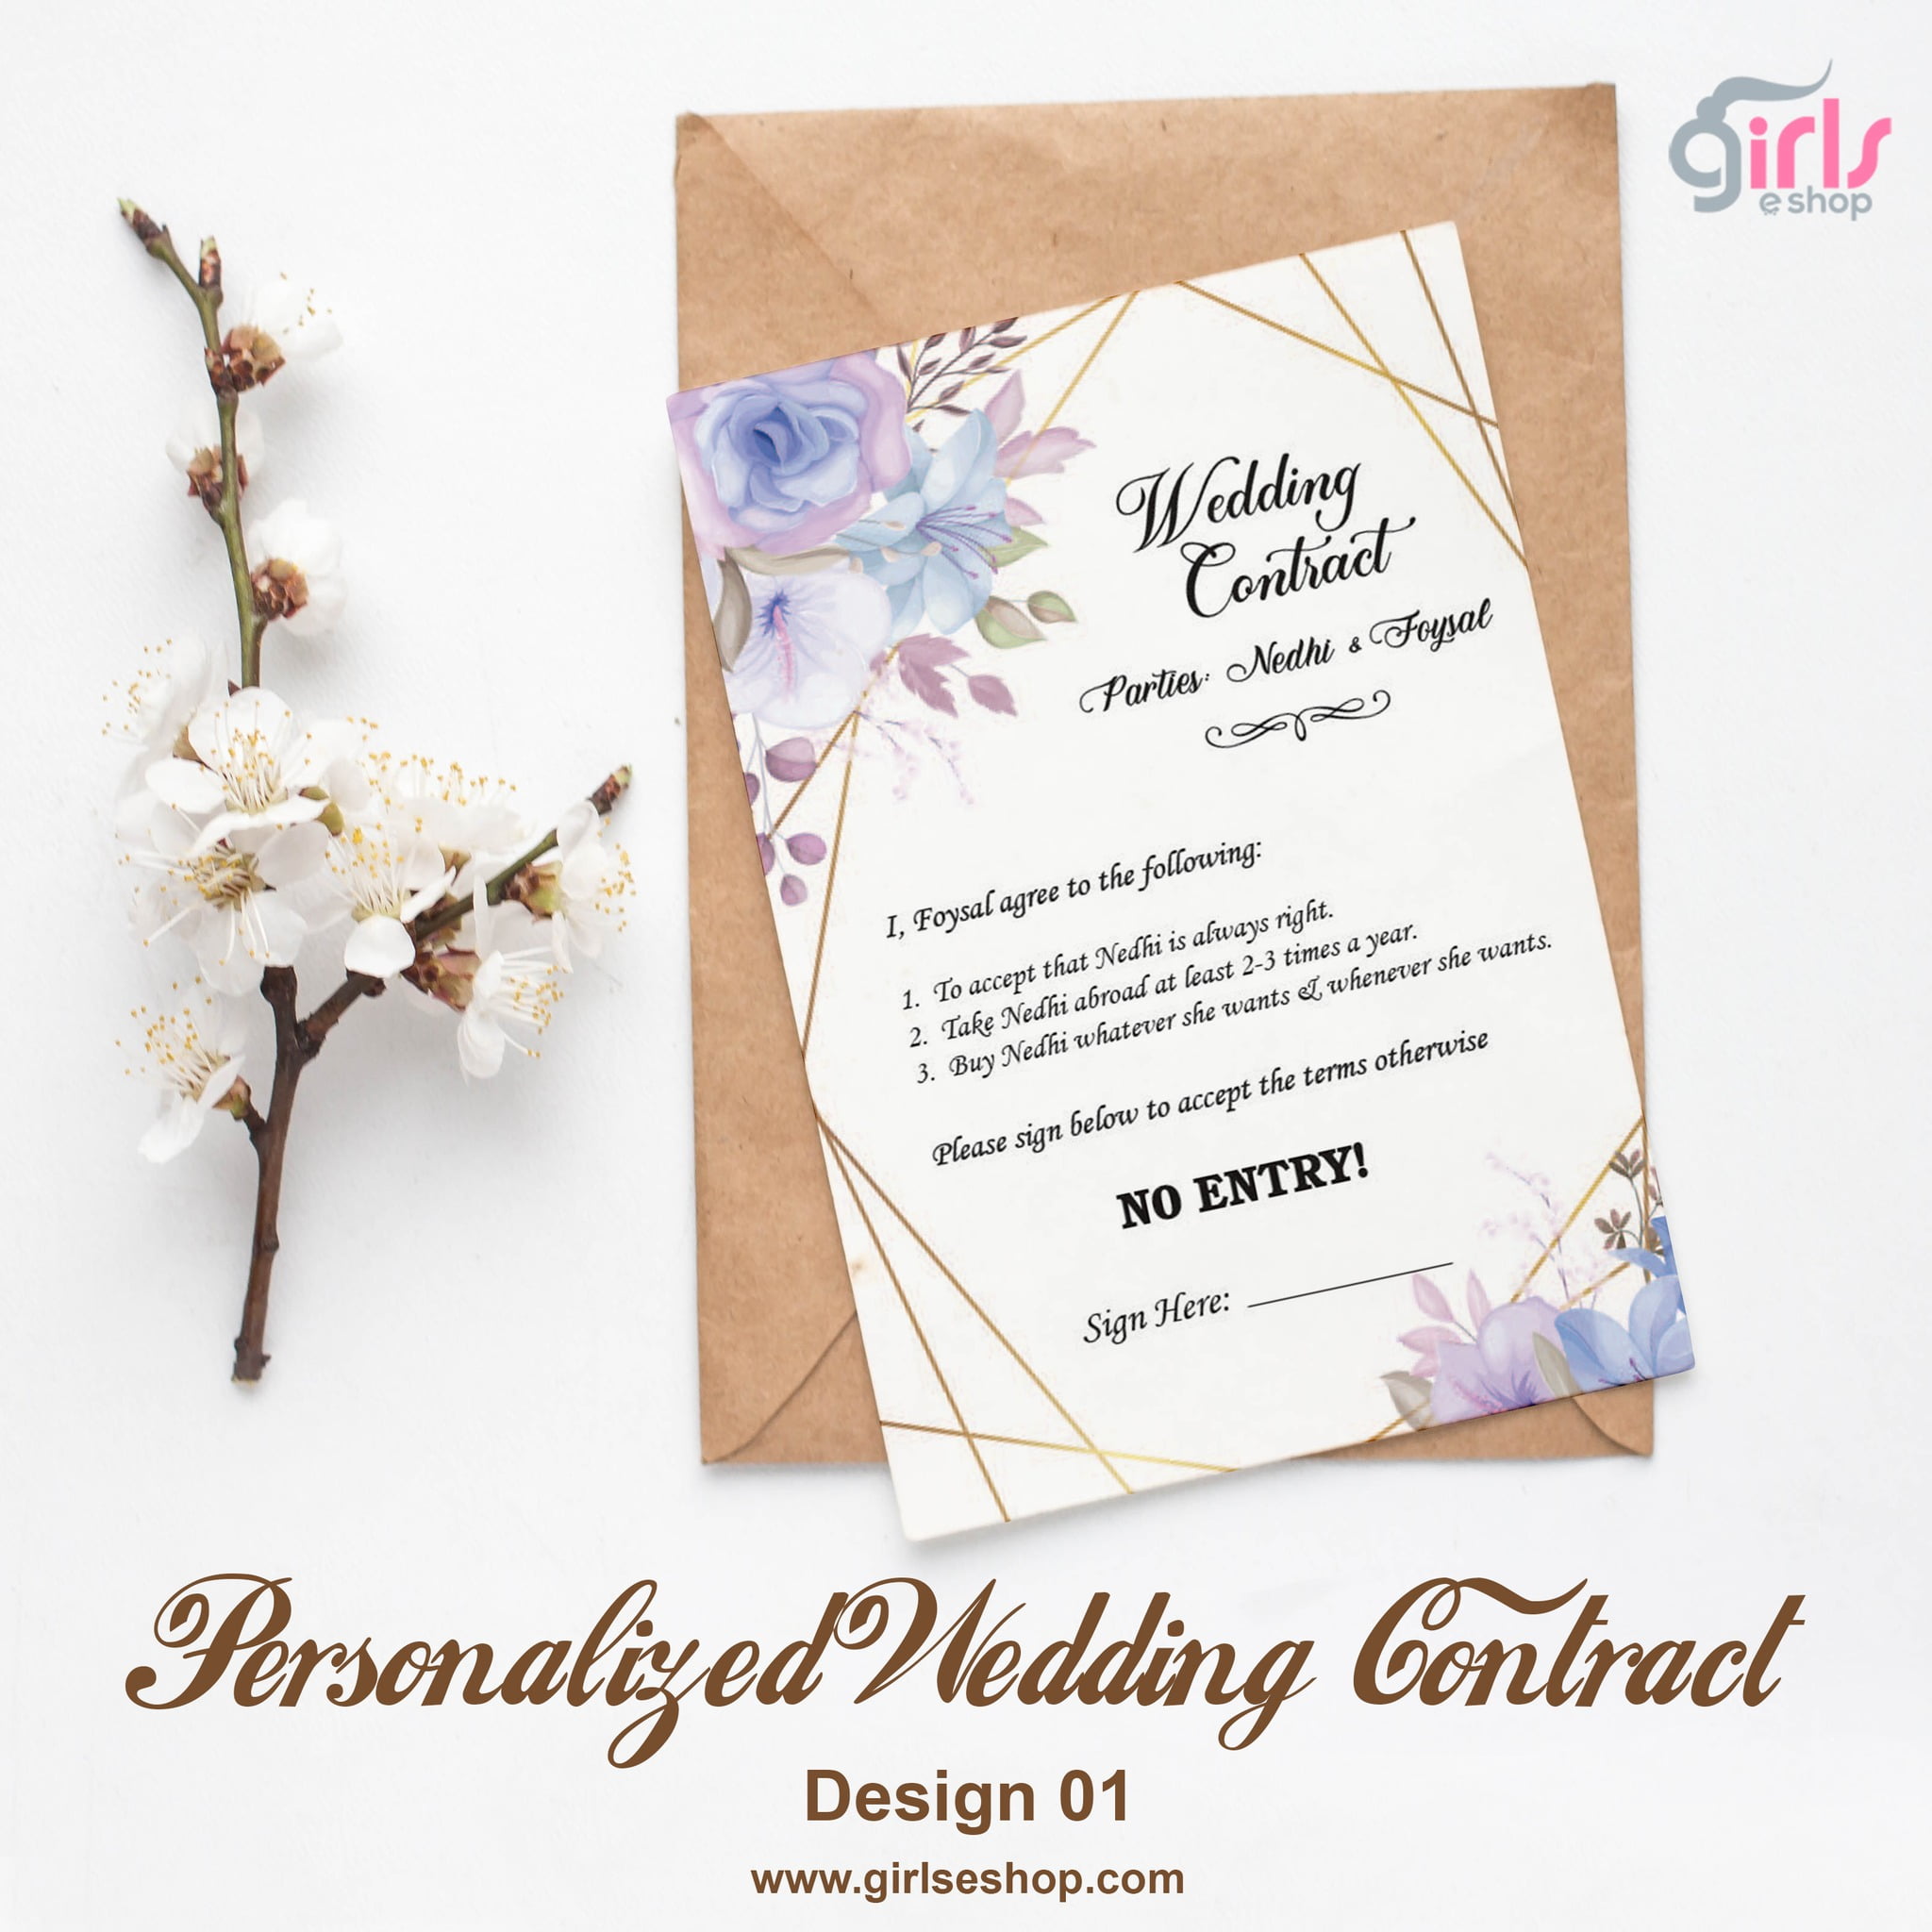 Personalized Wedding Contract - Love Contract - Design 01 - Girls e Shop